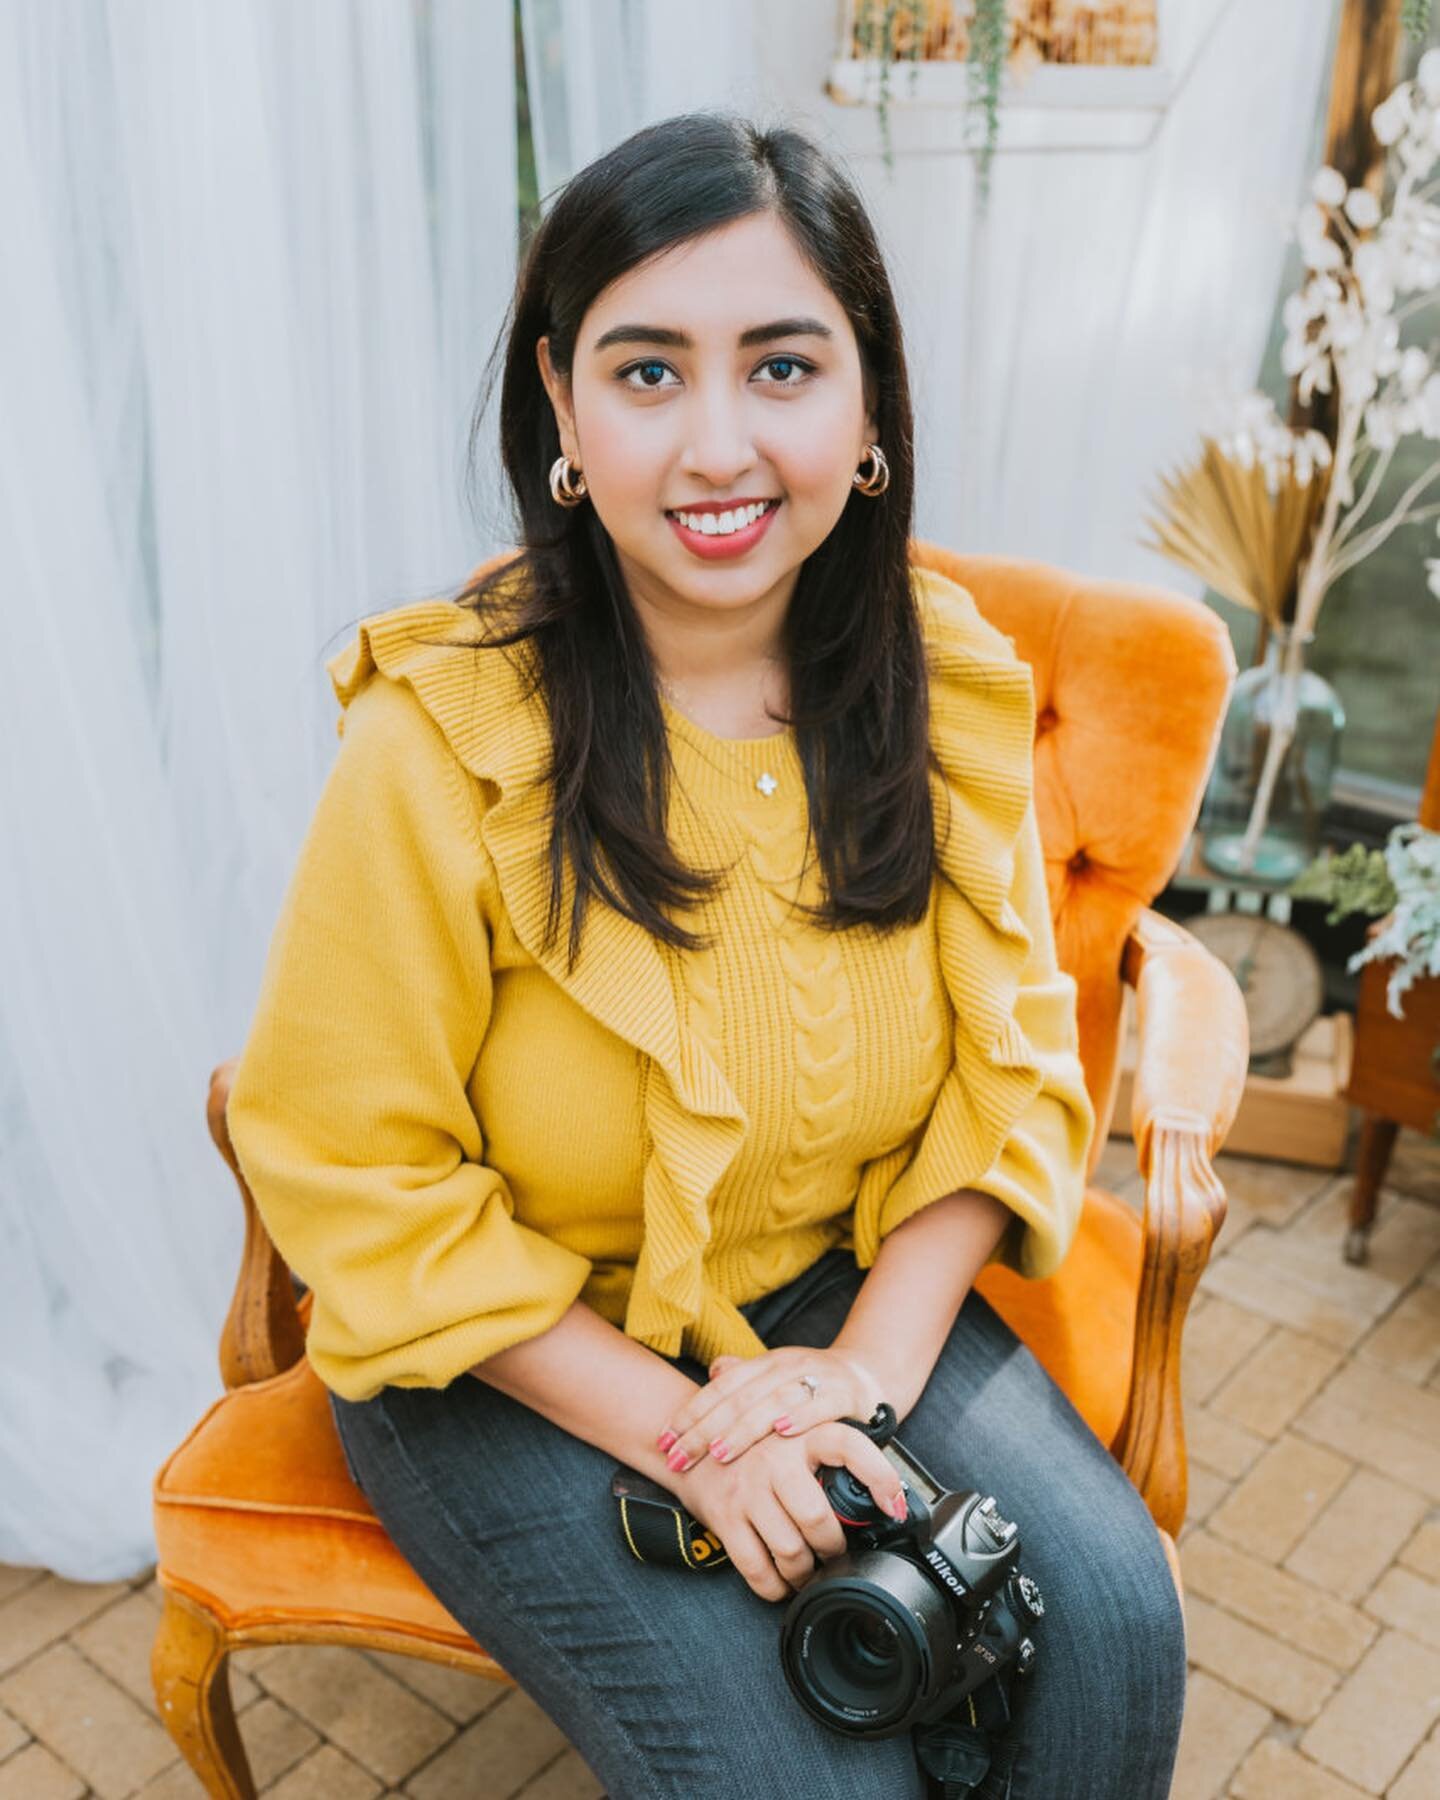 Hey there, friends! 👋 For those who are new here, I&rsquo;m Sanya, a Senior and Family Photographer based in the Seattle area. I specialize in lifestyle portraits, creating timeless and cinematic archives of your life&rsquo;s story.

If you&rsquo;re